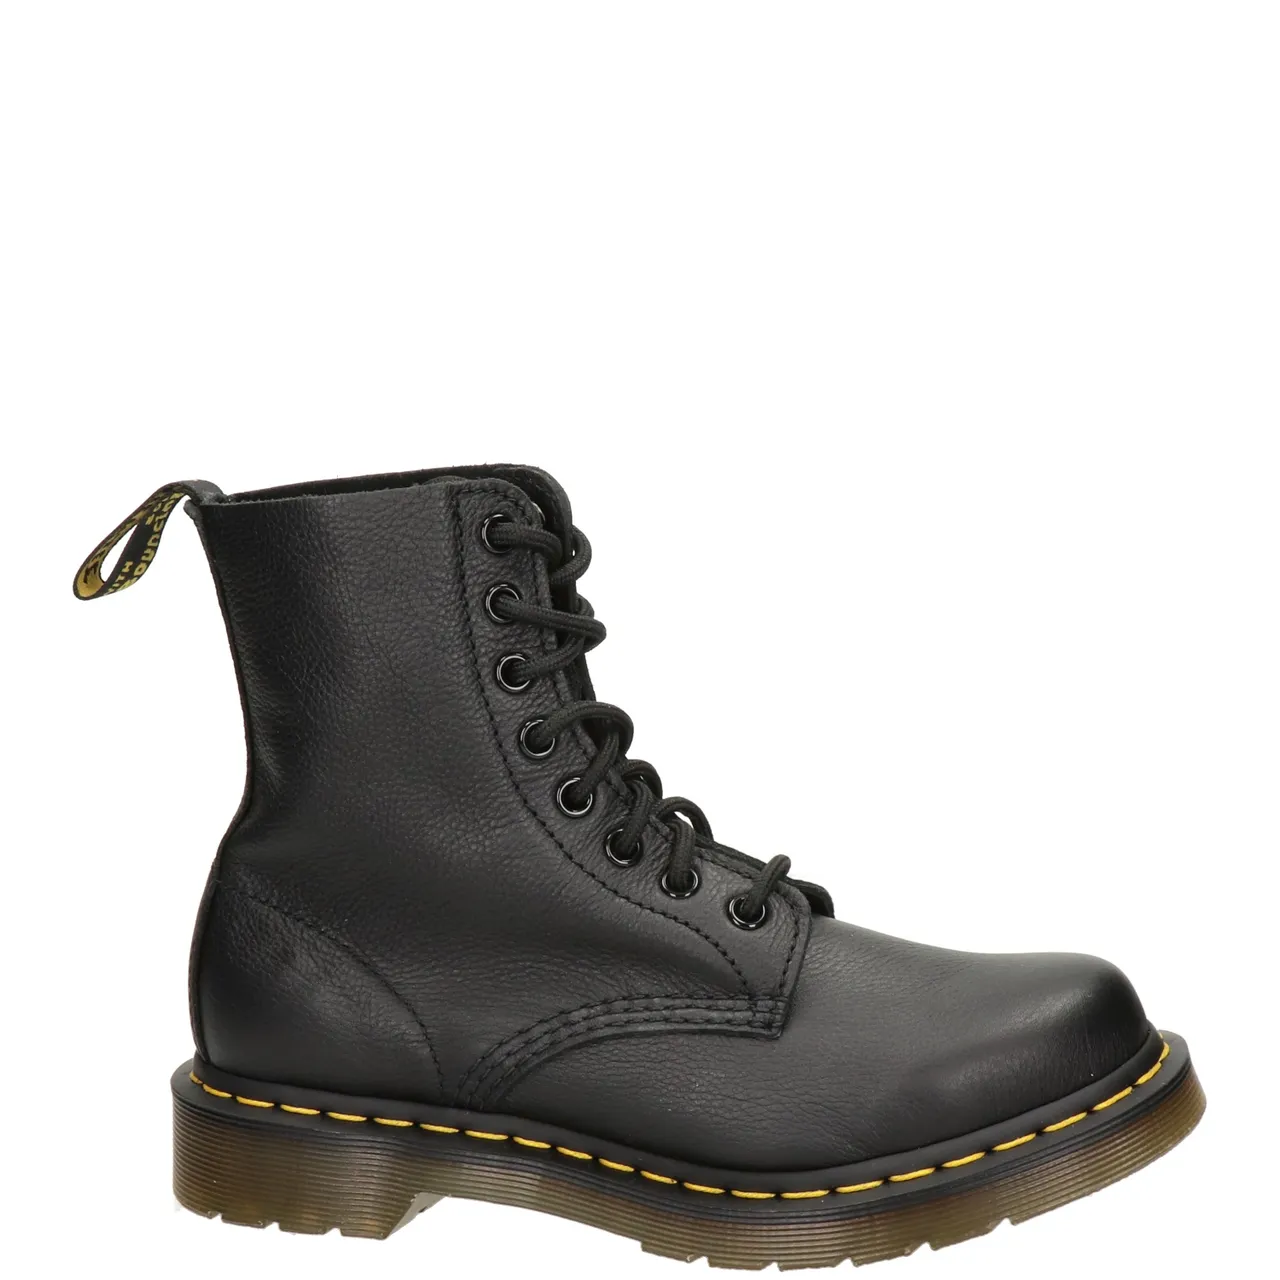 Dr. Martens 1460 Pascal Virginia veterboots